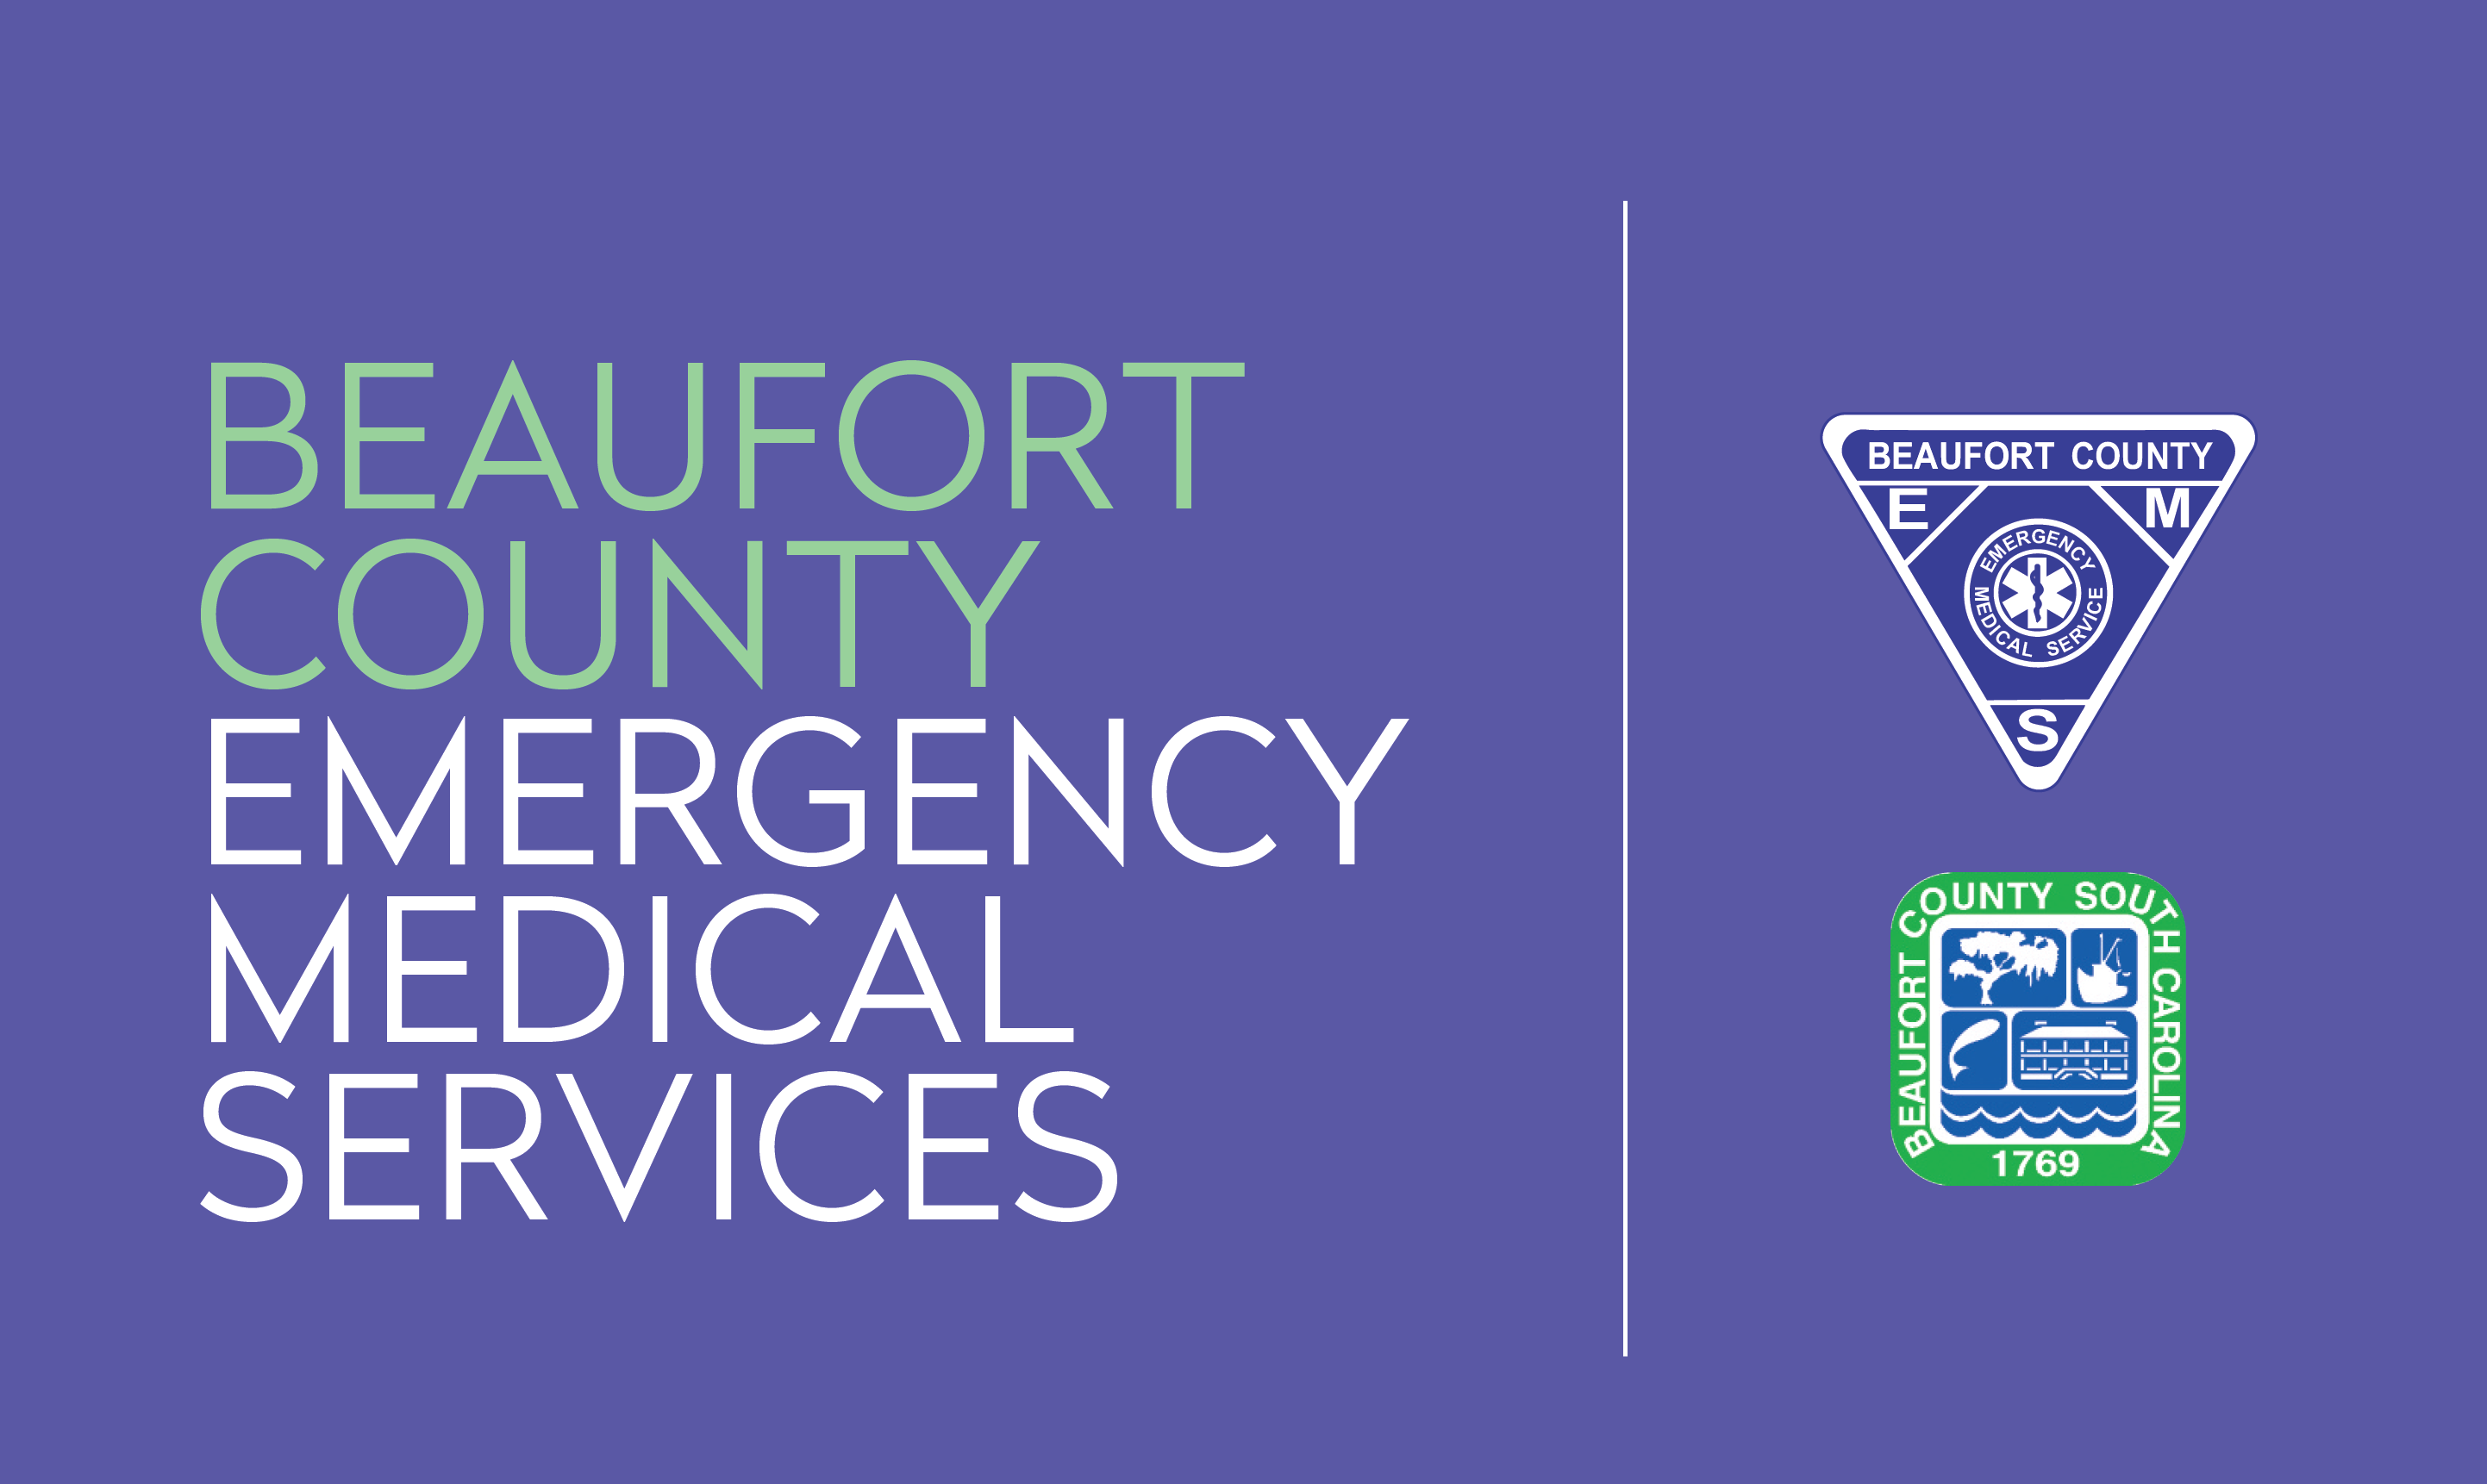 Beaufort County EMS Services Continue: Citizens Encouraged to Have an Emergency Plan Ahead of Hurricane Dorian